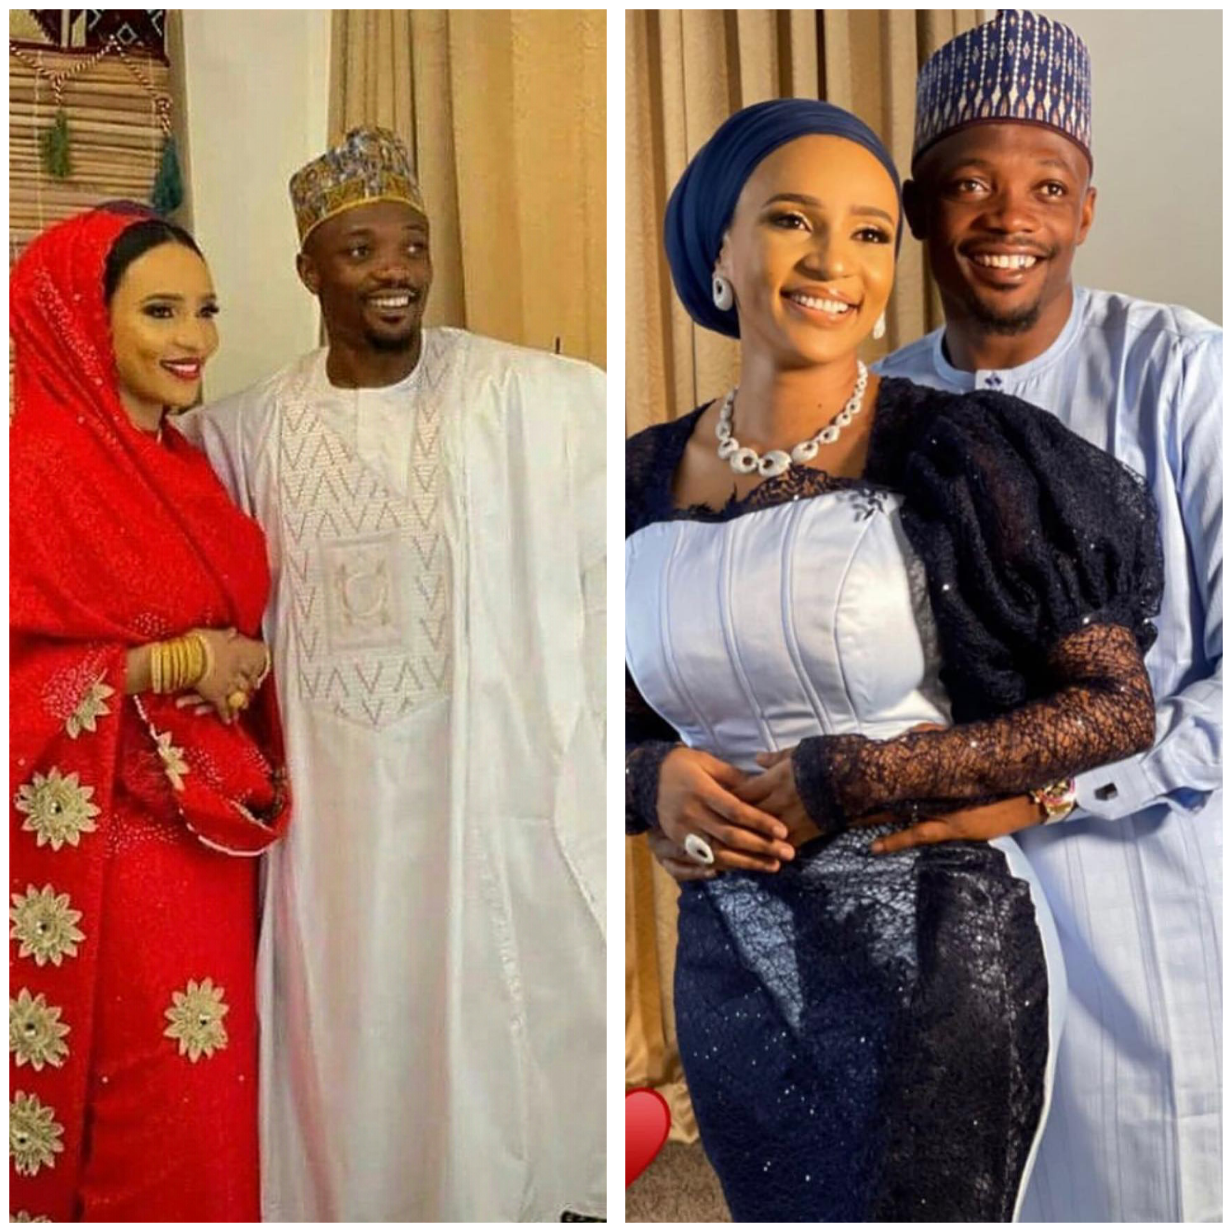 Nigerian footballer, Ahmed Musa marries another wife